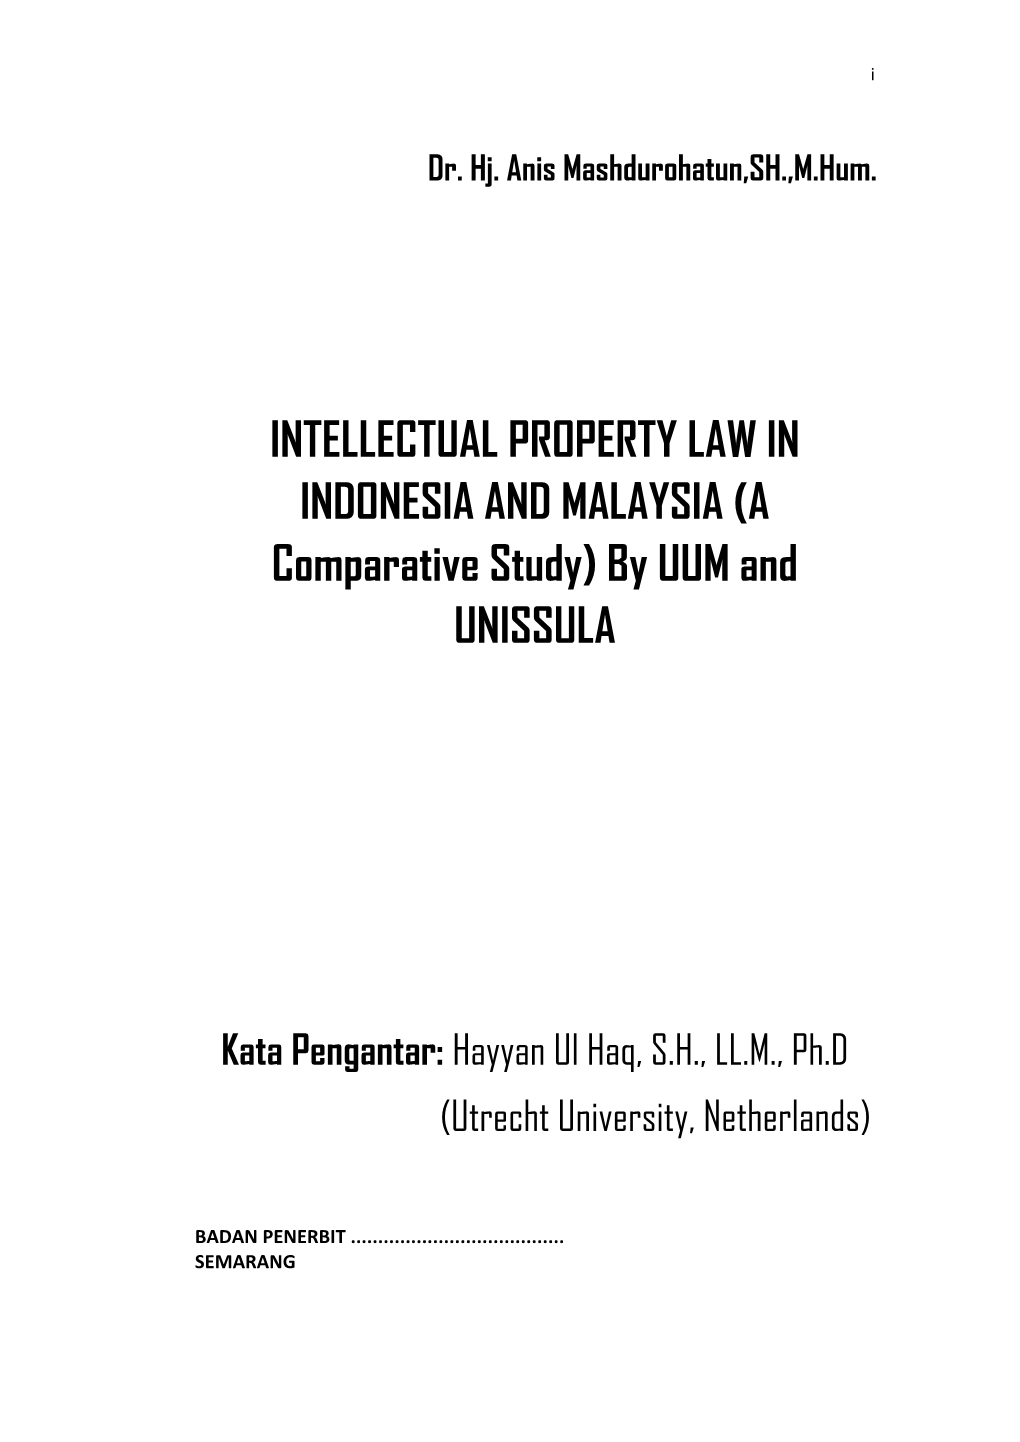 INTELLECTUAL PROPERTY LAW in INDONESIA and MALAYSIA (A Comparative Study) by UUM and UNISSULA